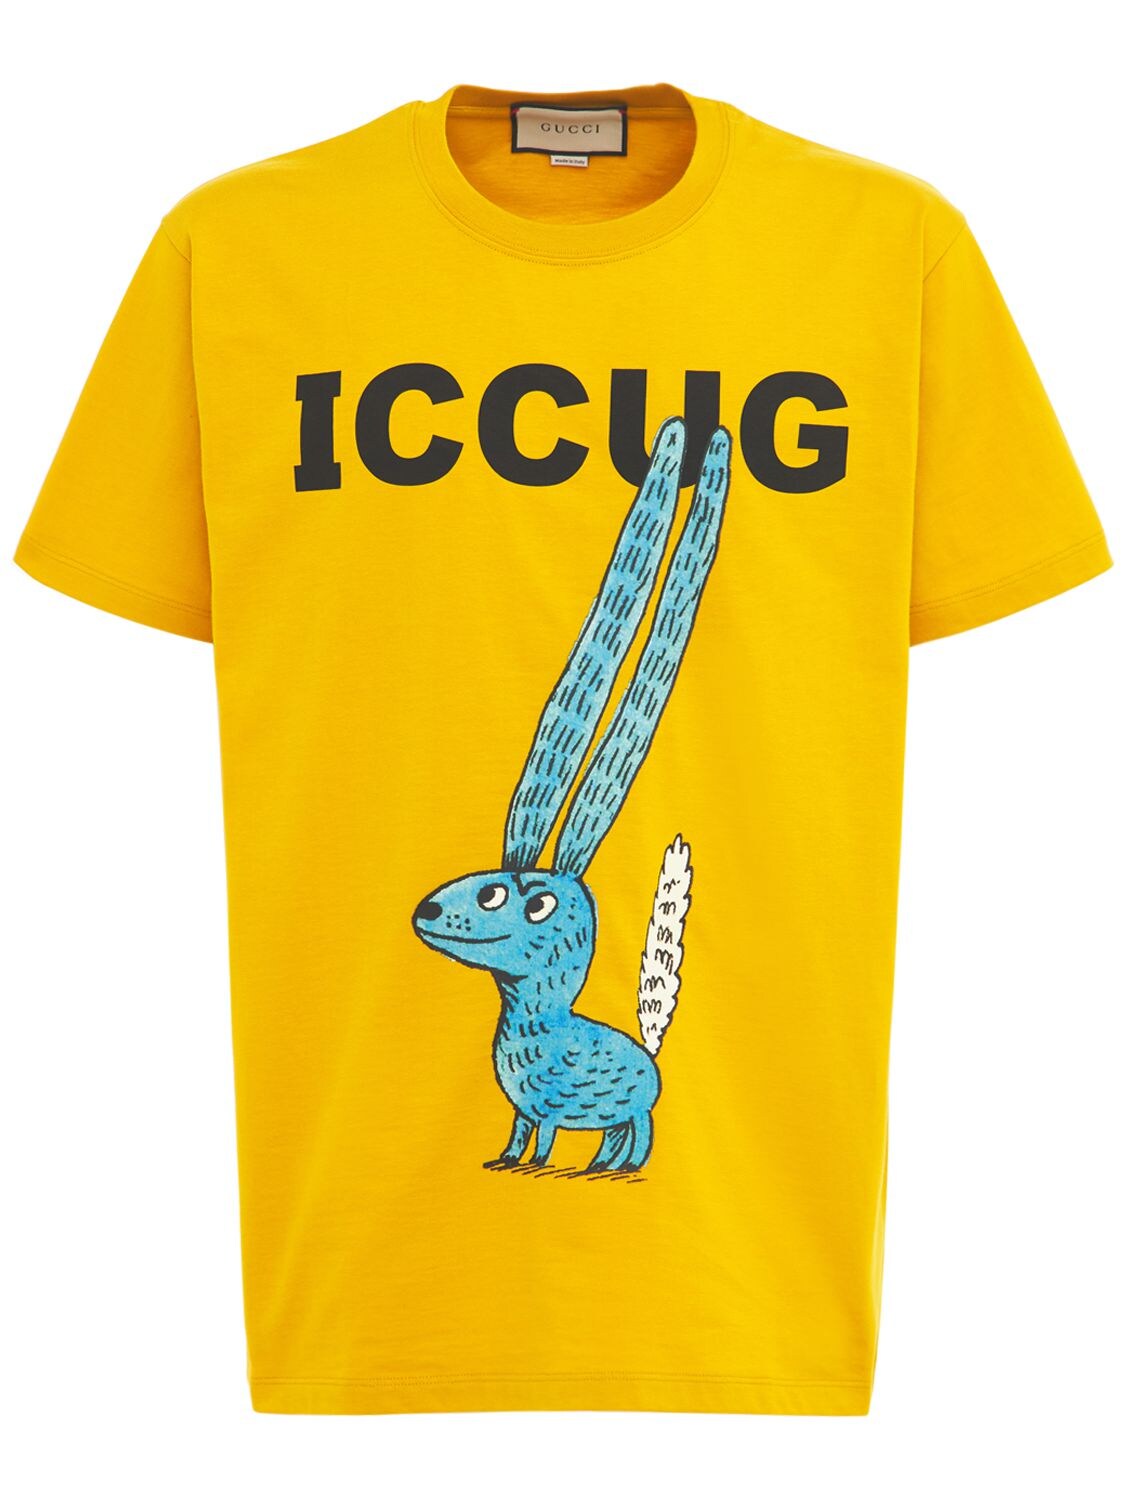 Gucci Iccug Animal Print Cotton T-shirt In Zest